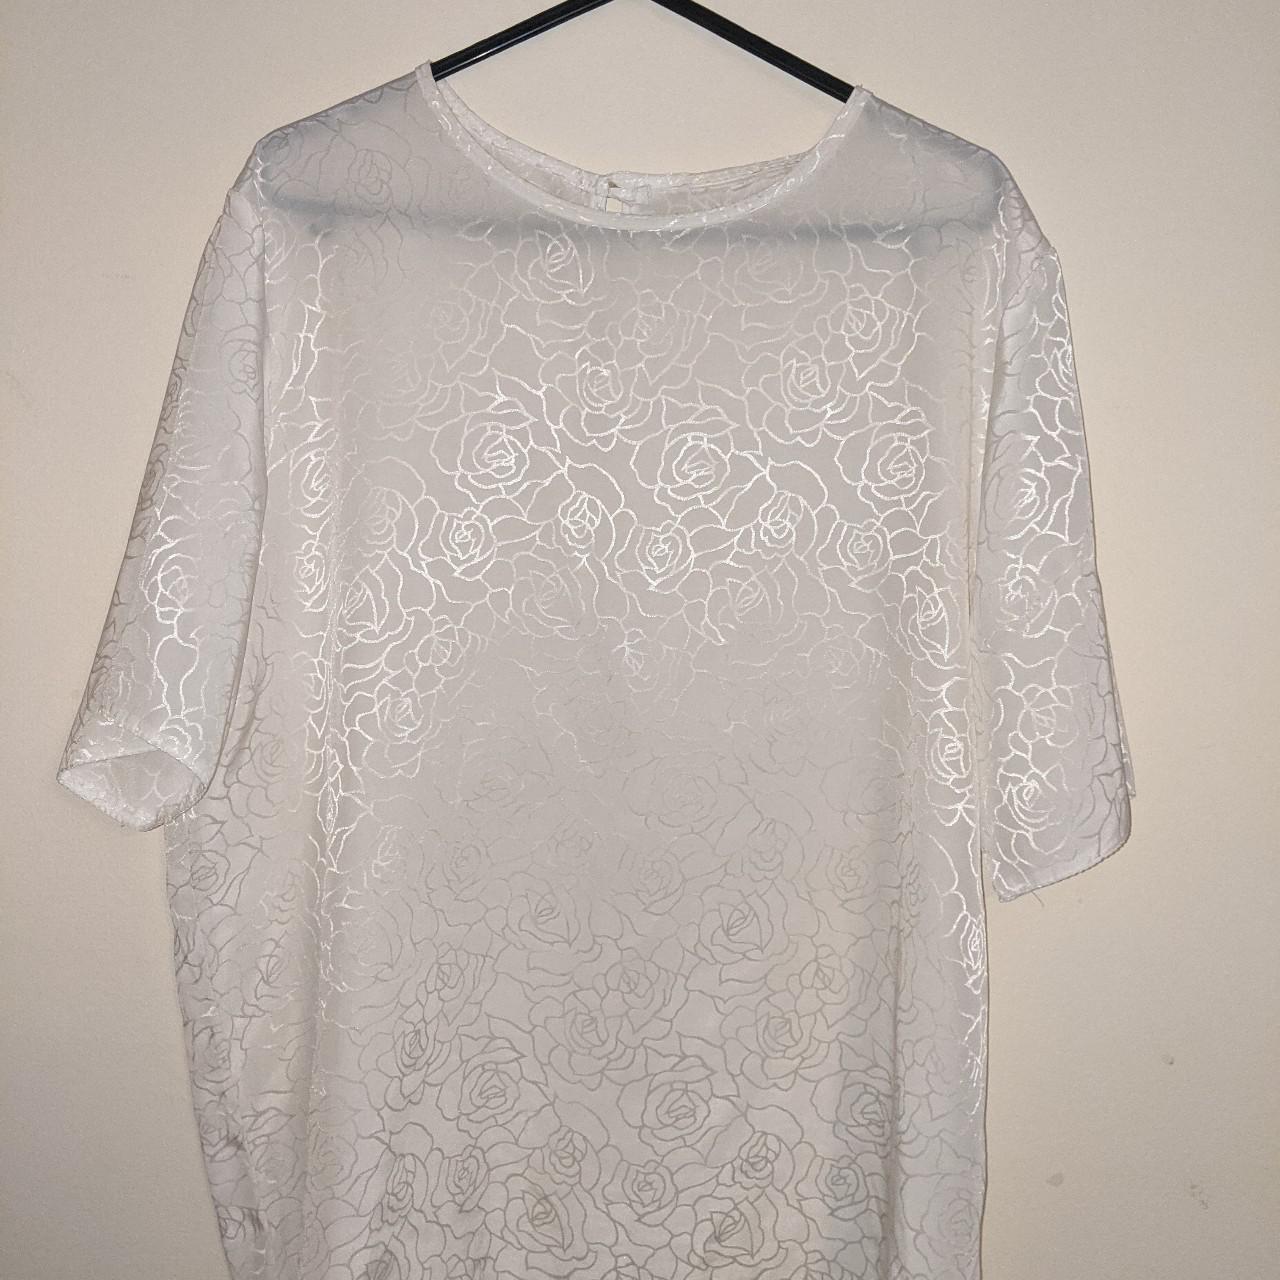 Product Image 1 - Sheer white t-shirt blouse with